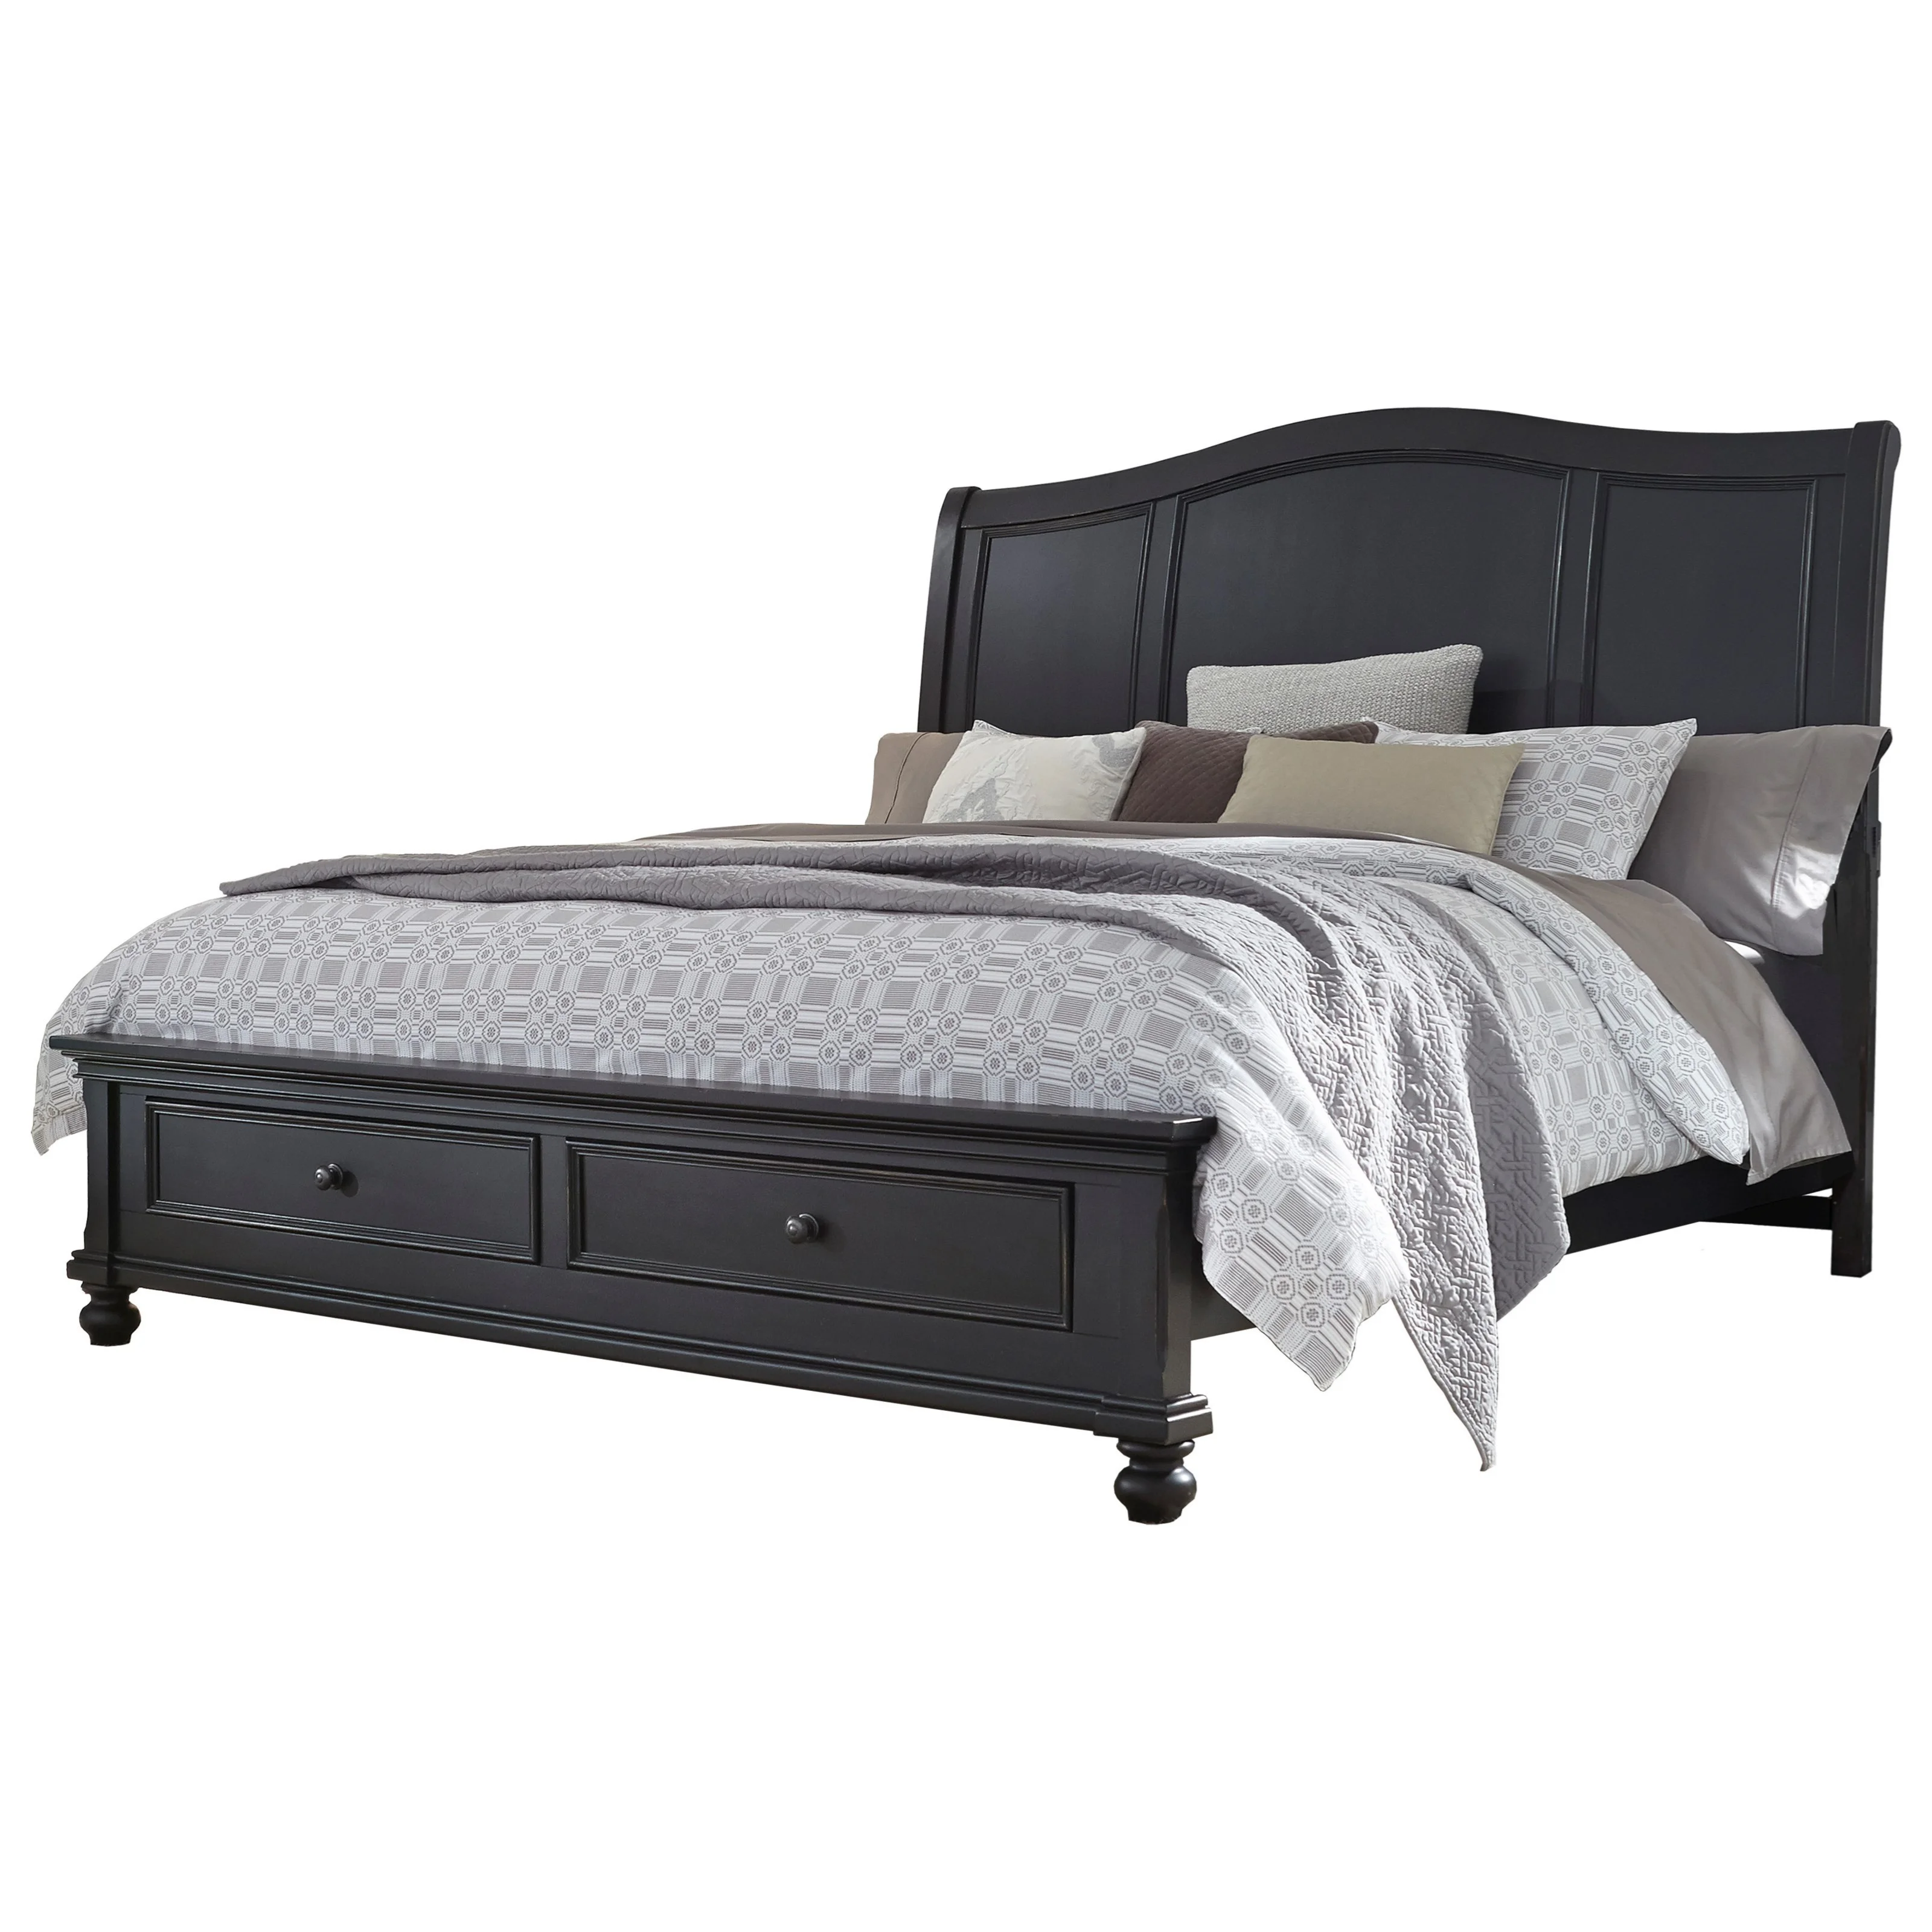 Historicus Aandringen Nodig uit Aspenhome Oxford I07-404/407D/410-BLK Transitional California King Sleigh  Storage Bed with USB Ports | Dunk & Bright Furniture | Bed - Sleigh